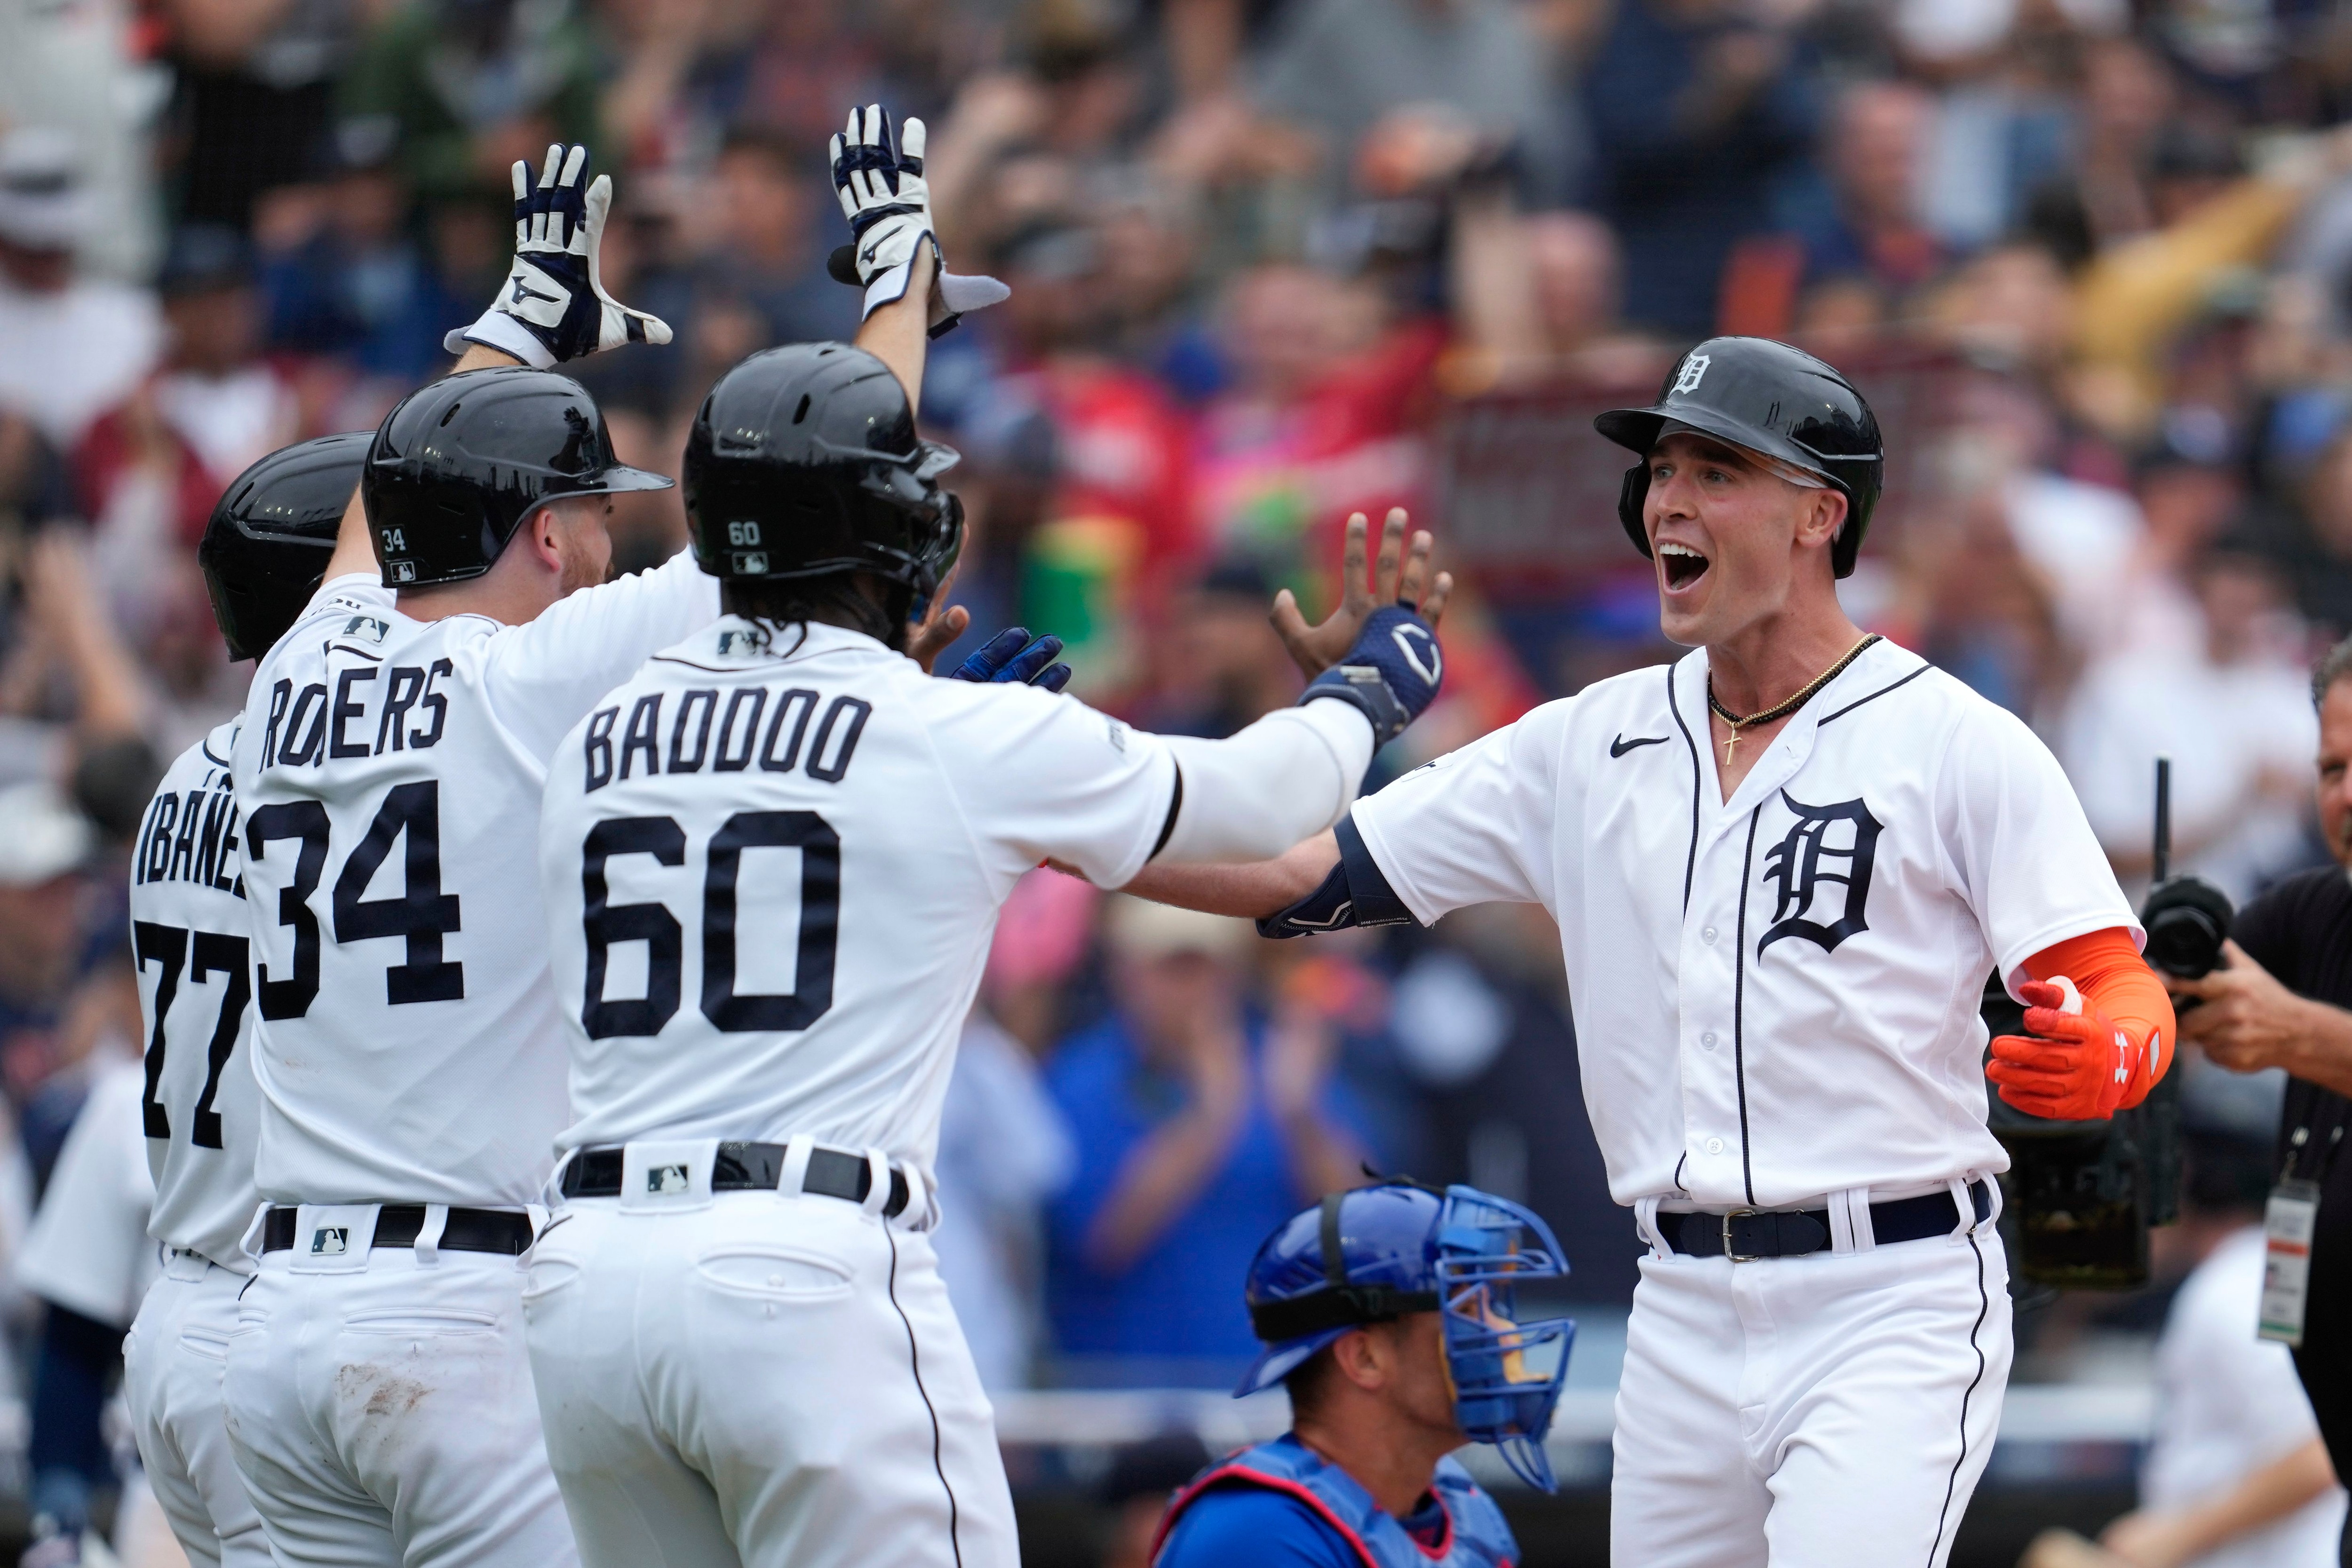 Postseason odds for the Tigers and around the MLB